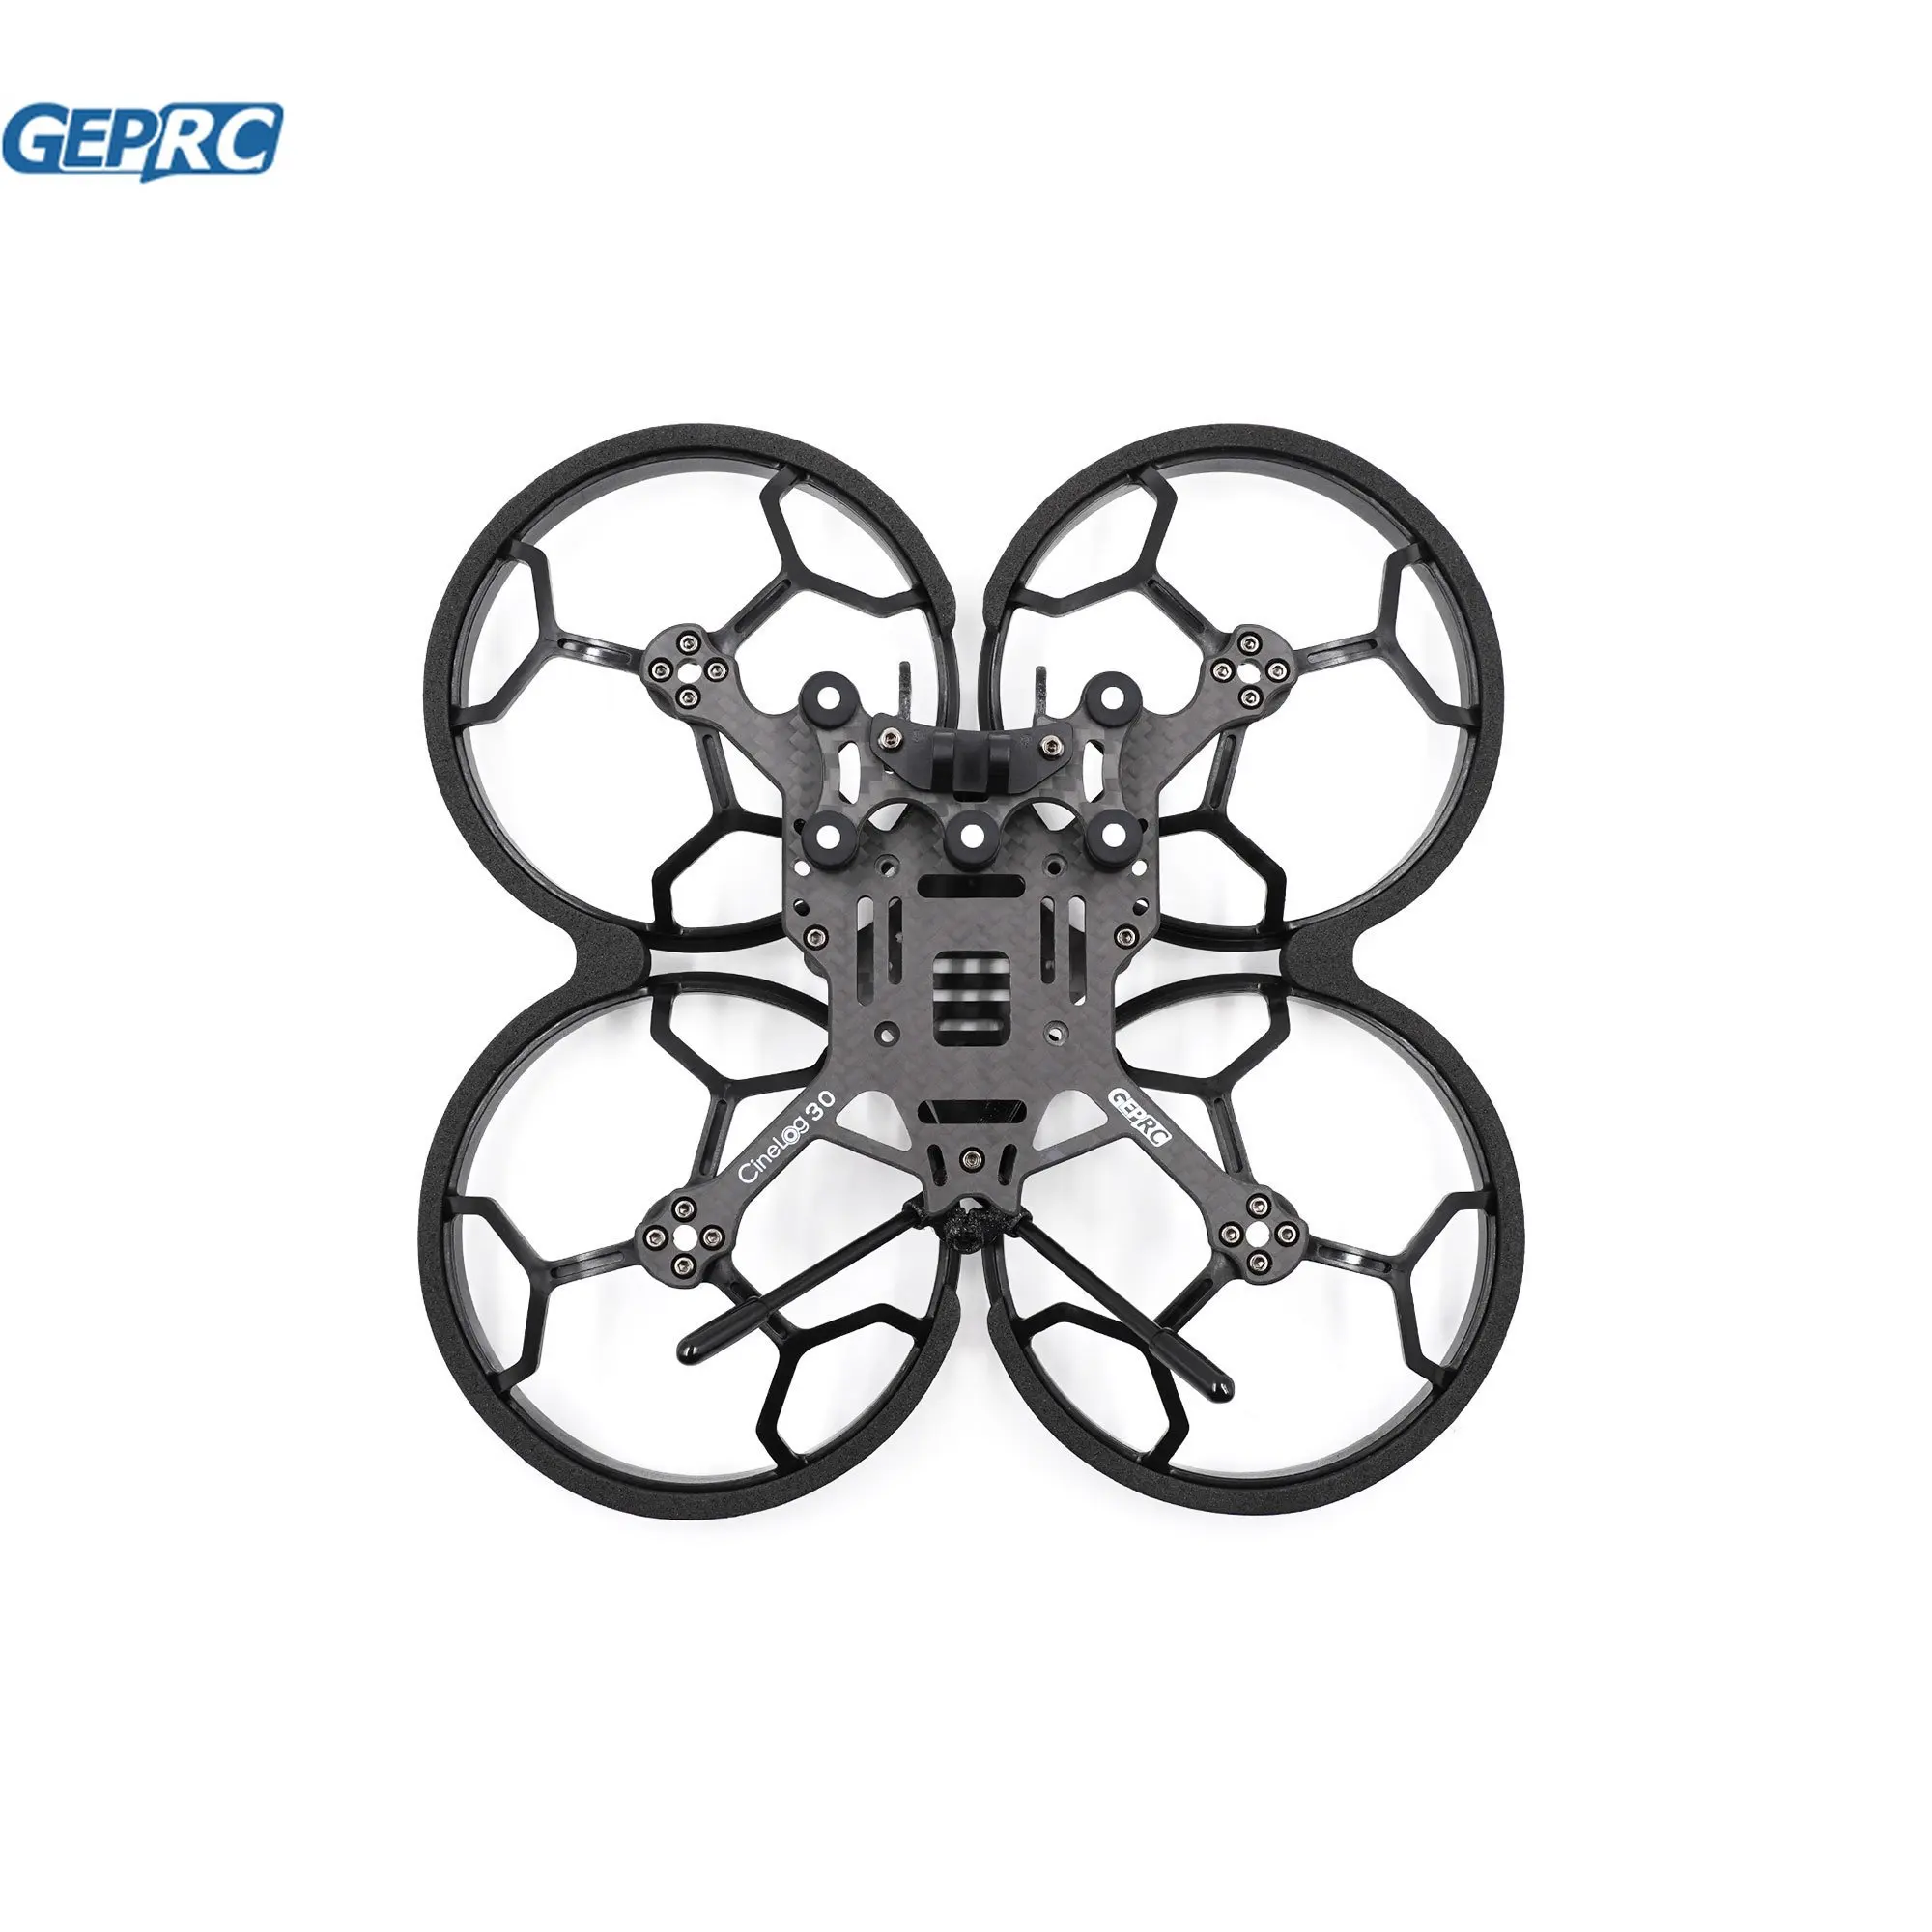 

GEPRC GEP-CL30 Frame Kits Suitable For Cinelog30 Drone Carbon Fiber Frame For DIY RC FPV Quadcopter Drone Accessories Parts